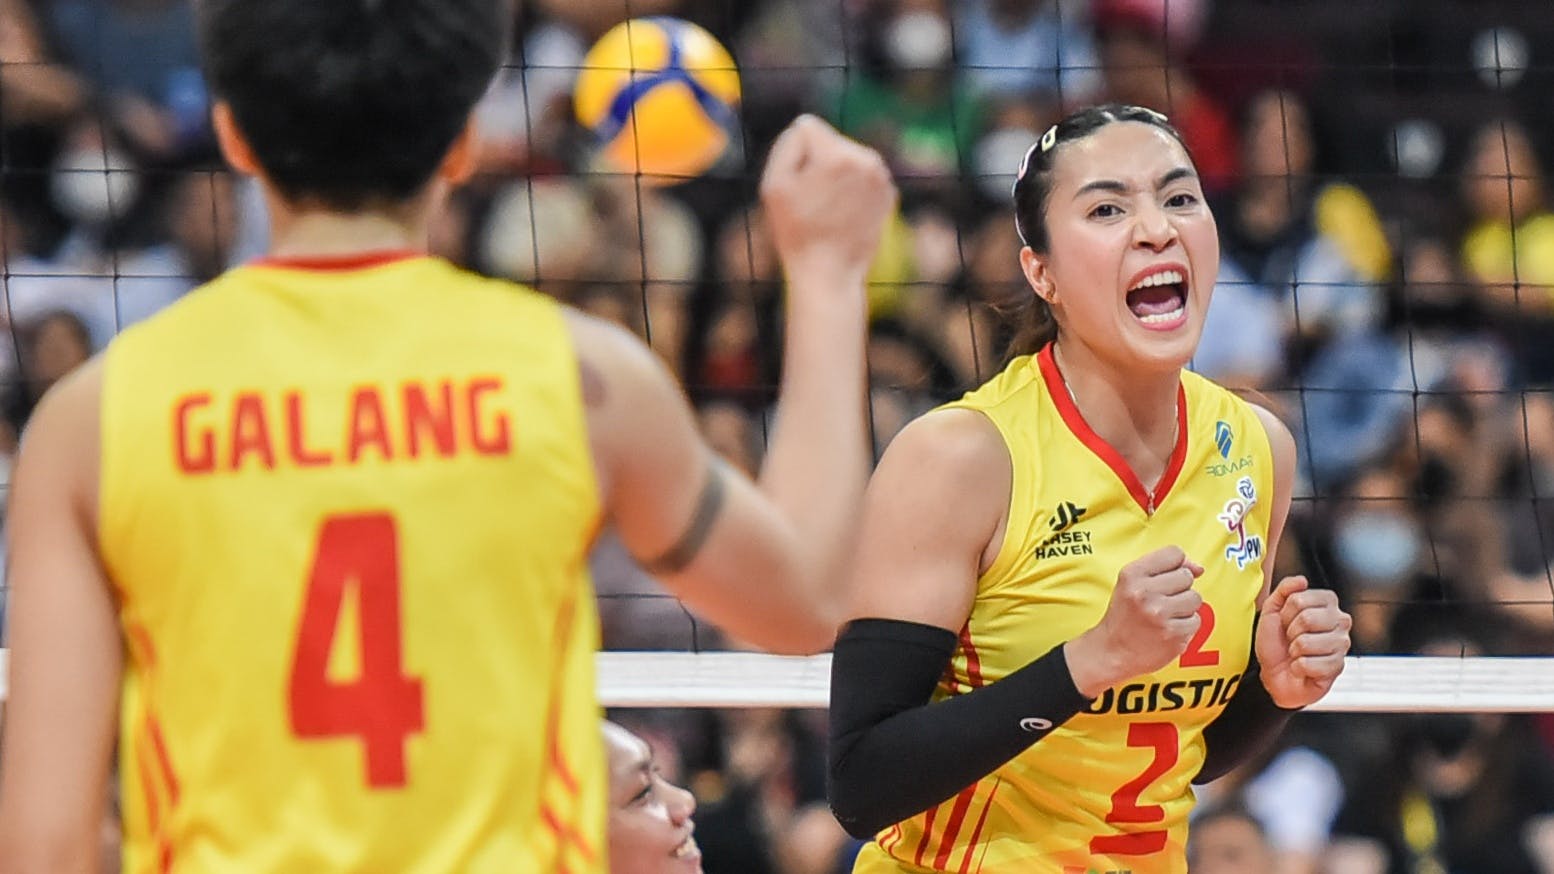 Aby Maraño shows off swag in crucial moments, leads F2 to third place